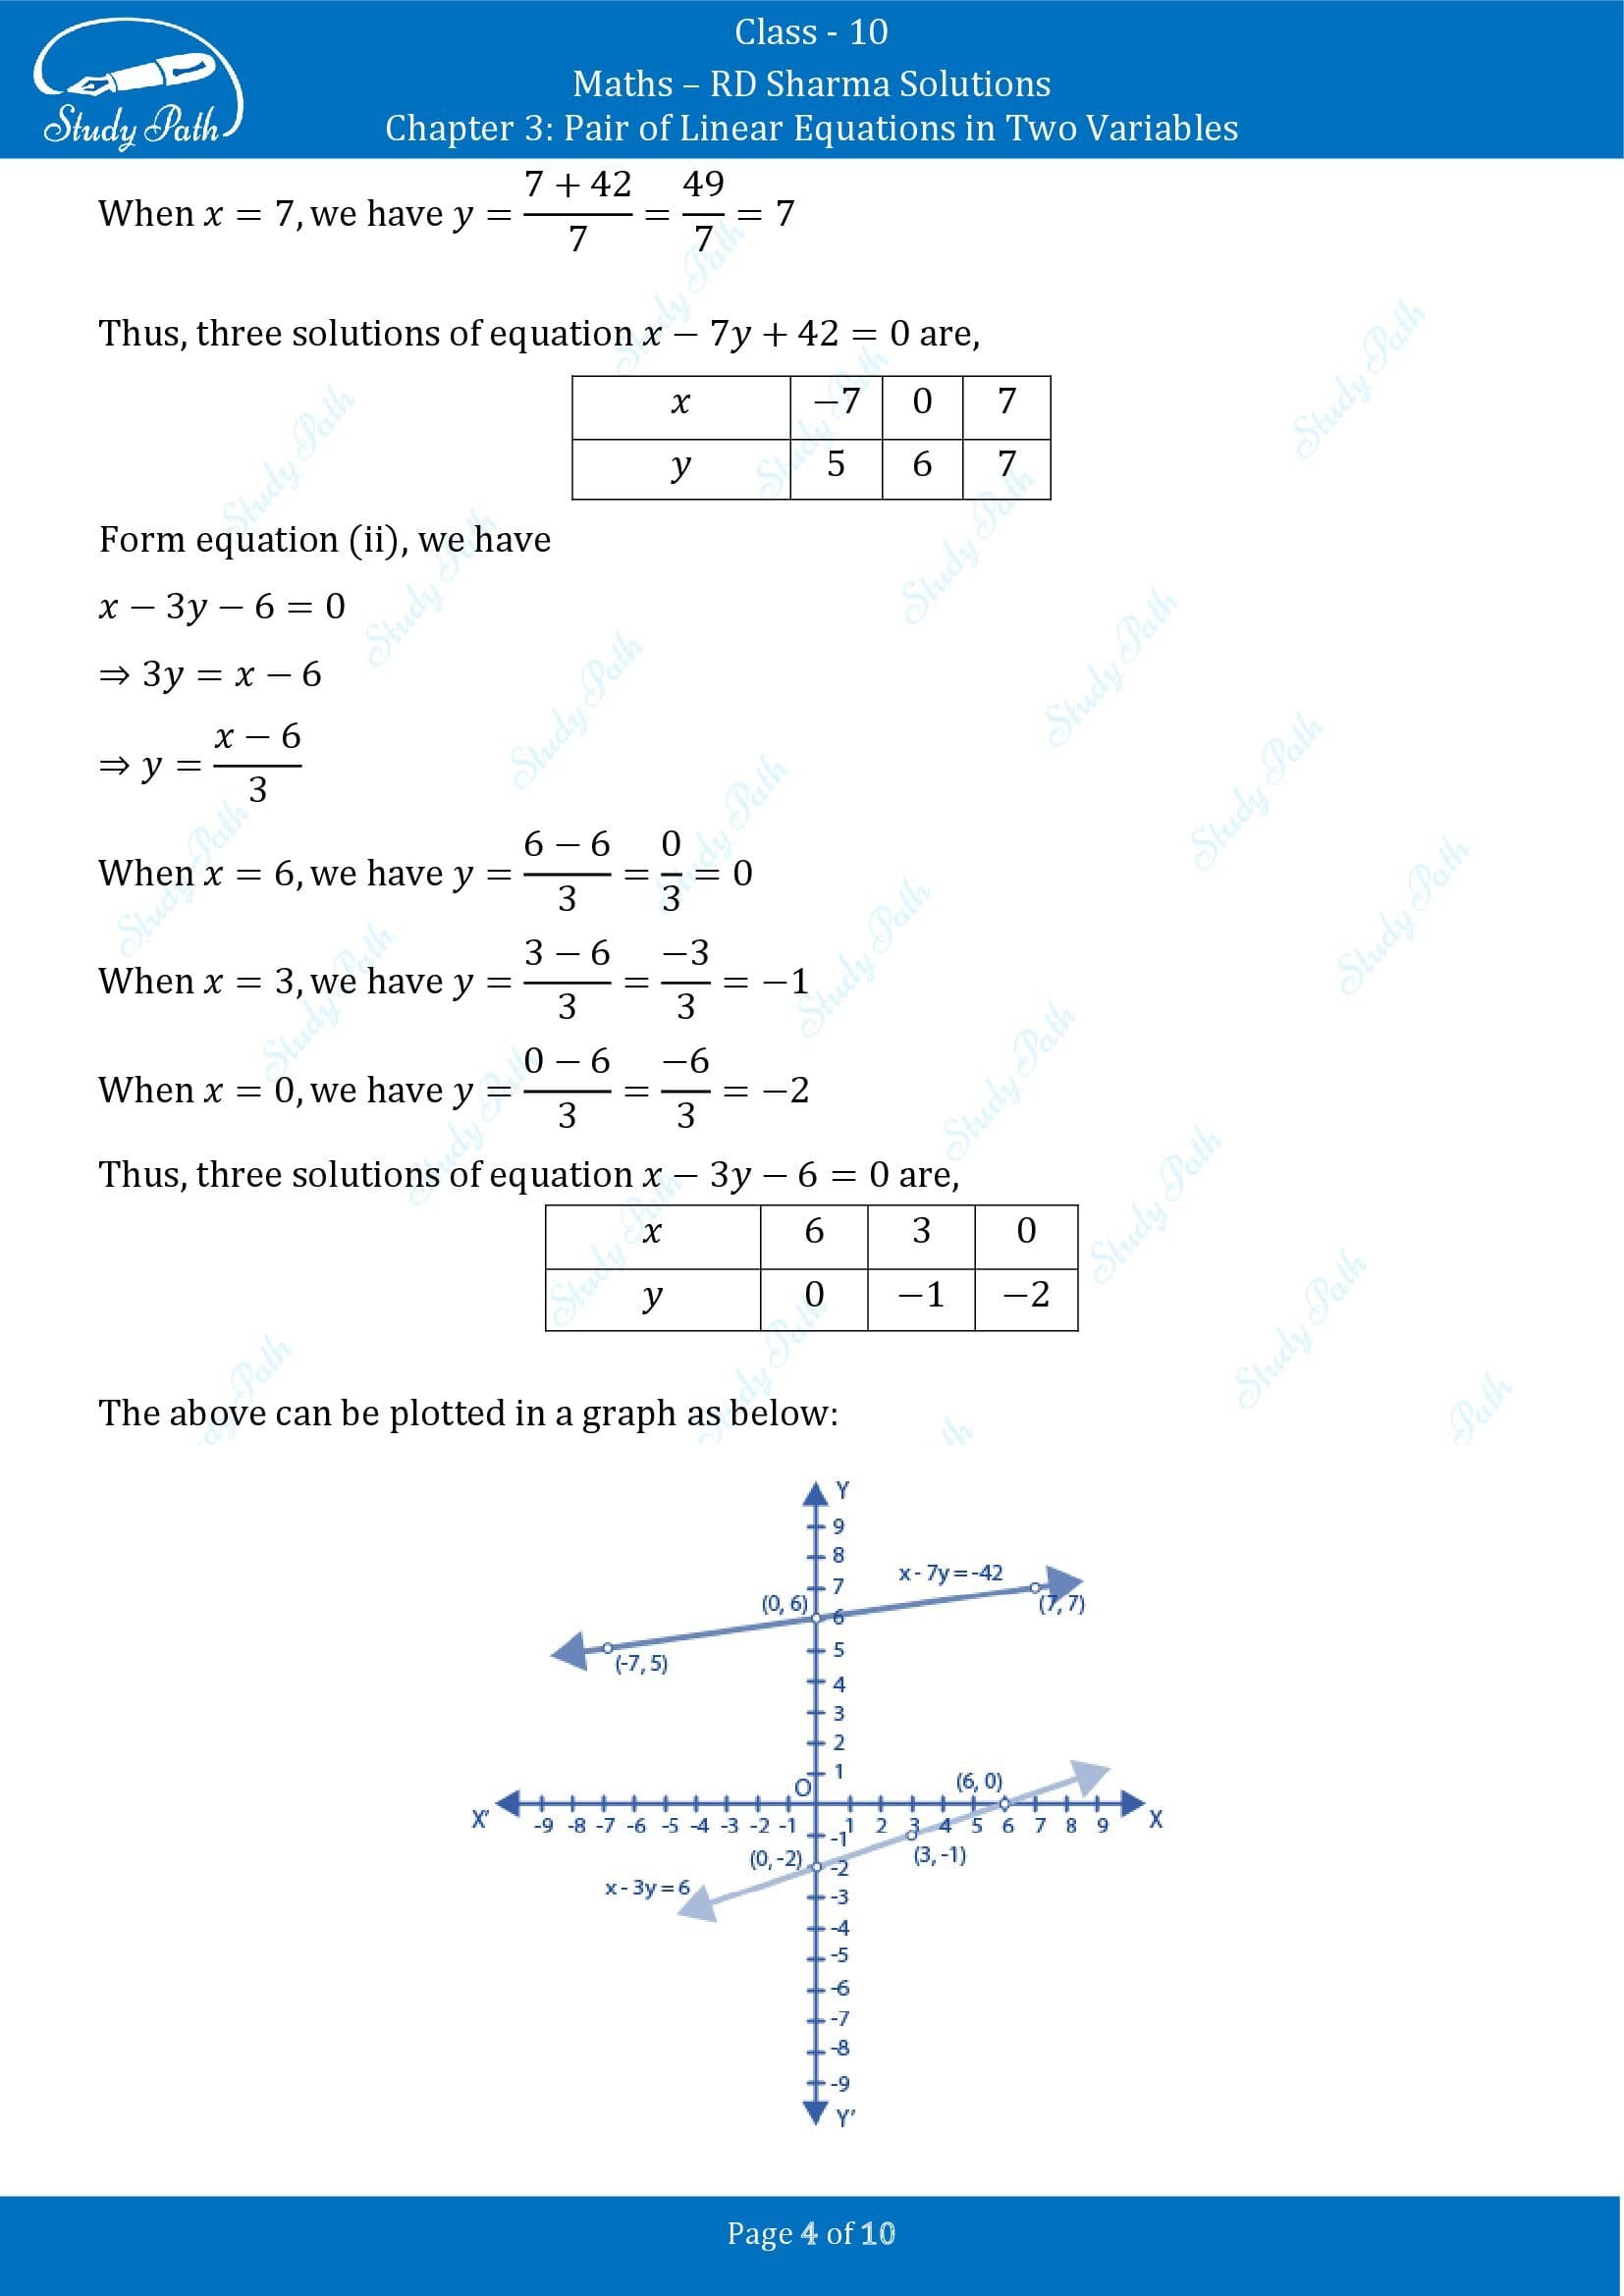 RD Sharma Solutions Class 10 Chapter 3 Pair of Linear Equations in Two Variables Exercise 3.1 00004